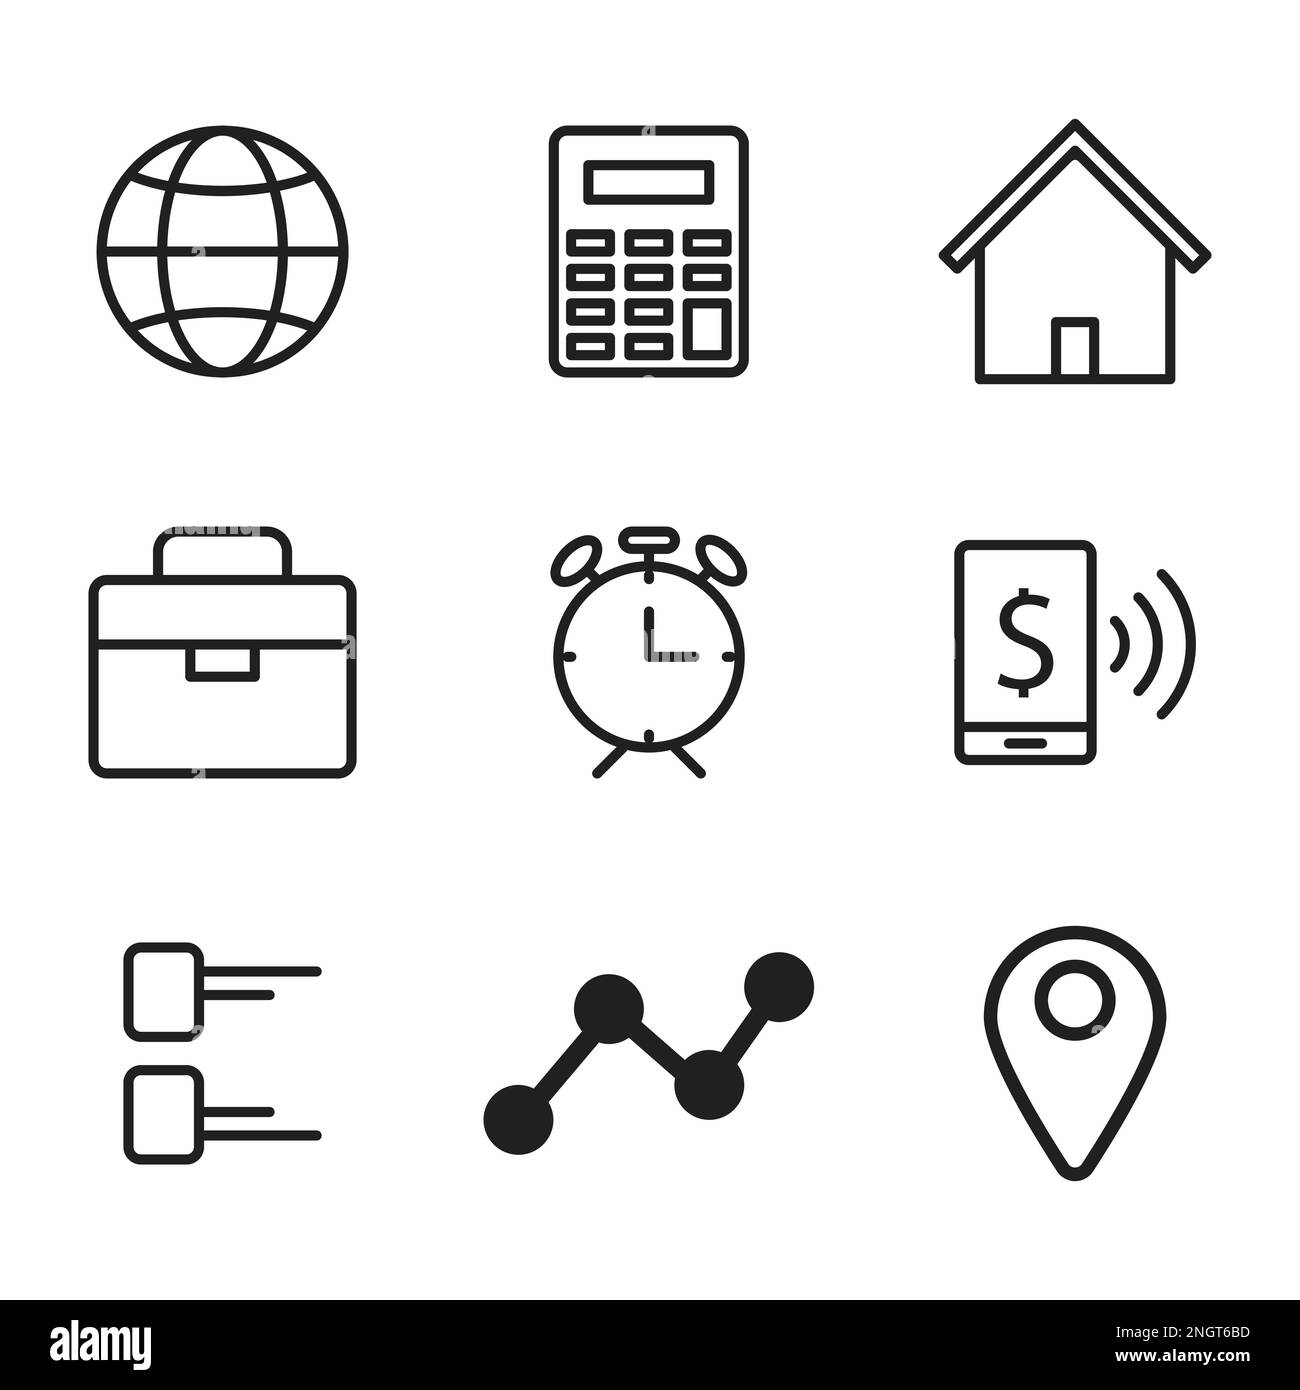 Business icon set for digital marketing apps and web, clock, timer, home, location, business bag icons Stock Vector